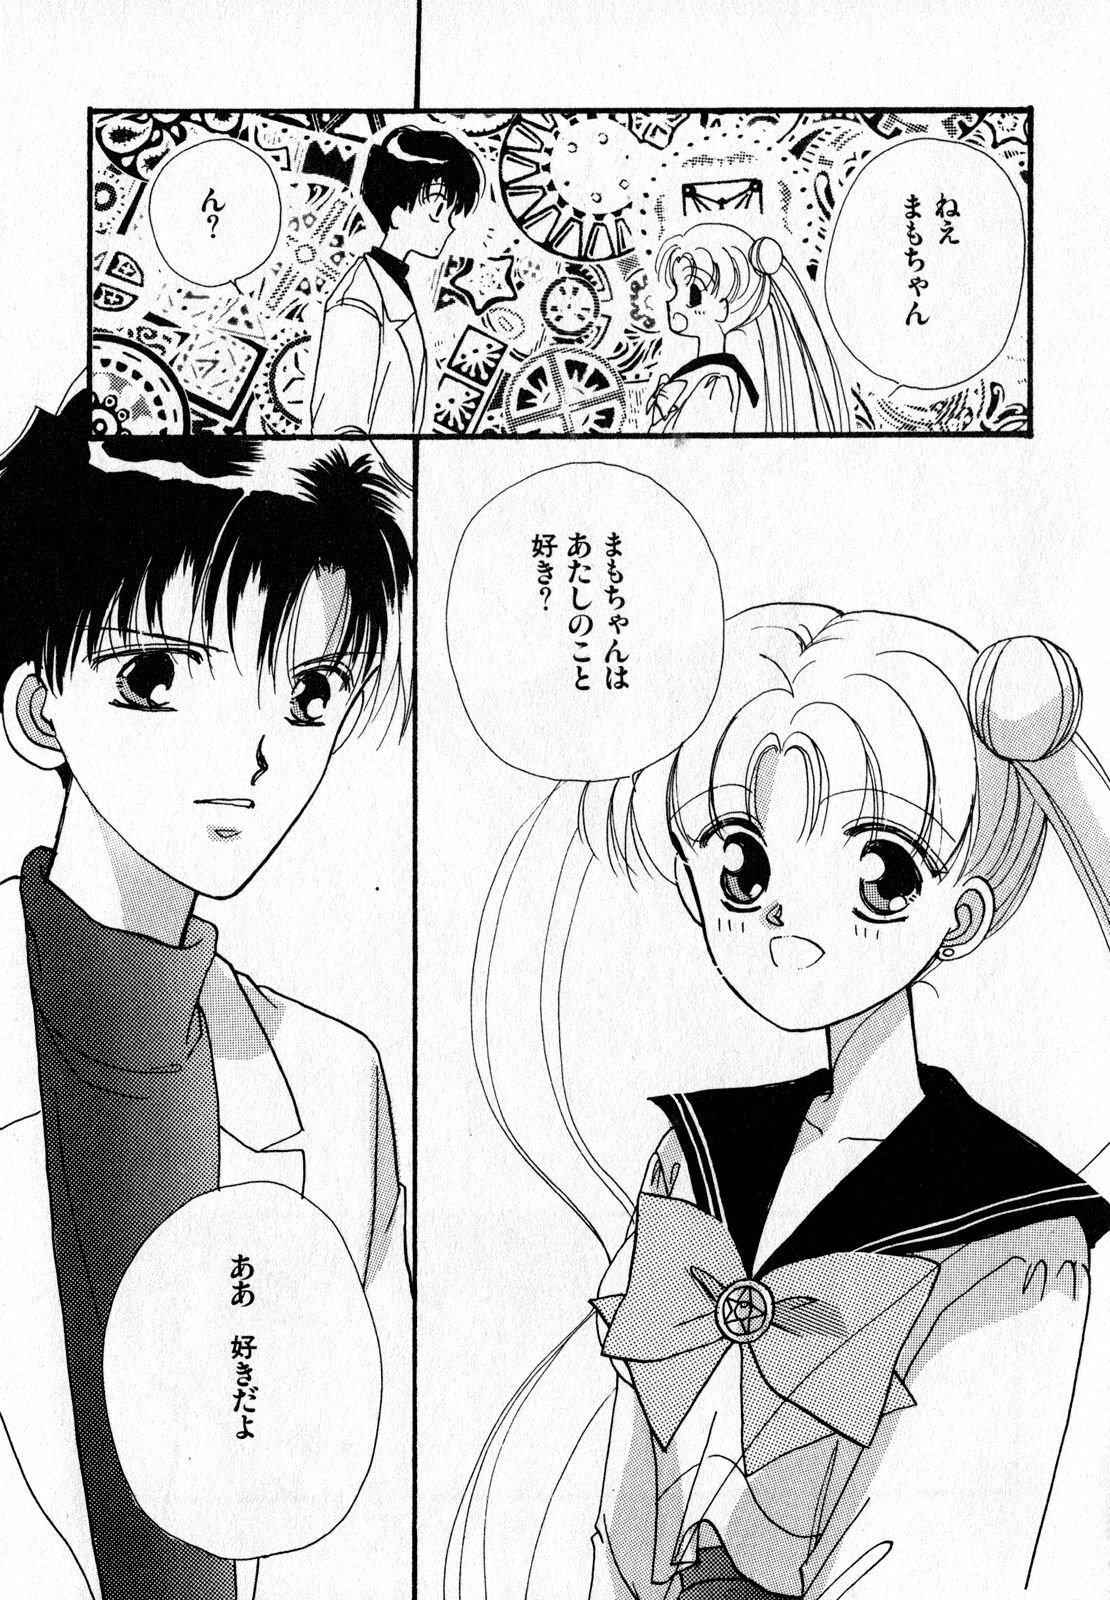 [Anthology] Lunatic Party 7 (Sailor Moon) page 34 full